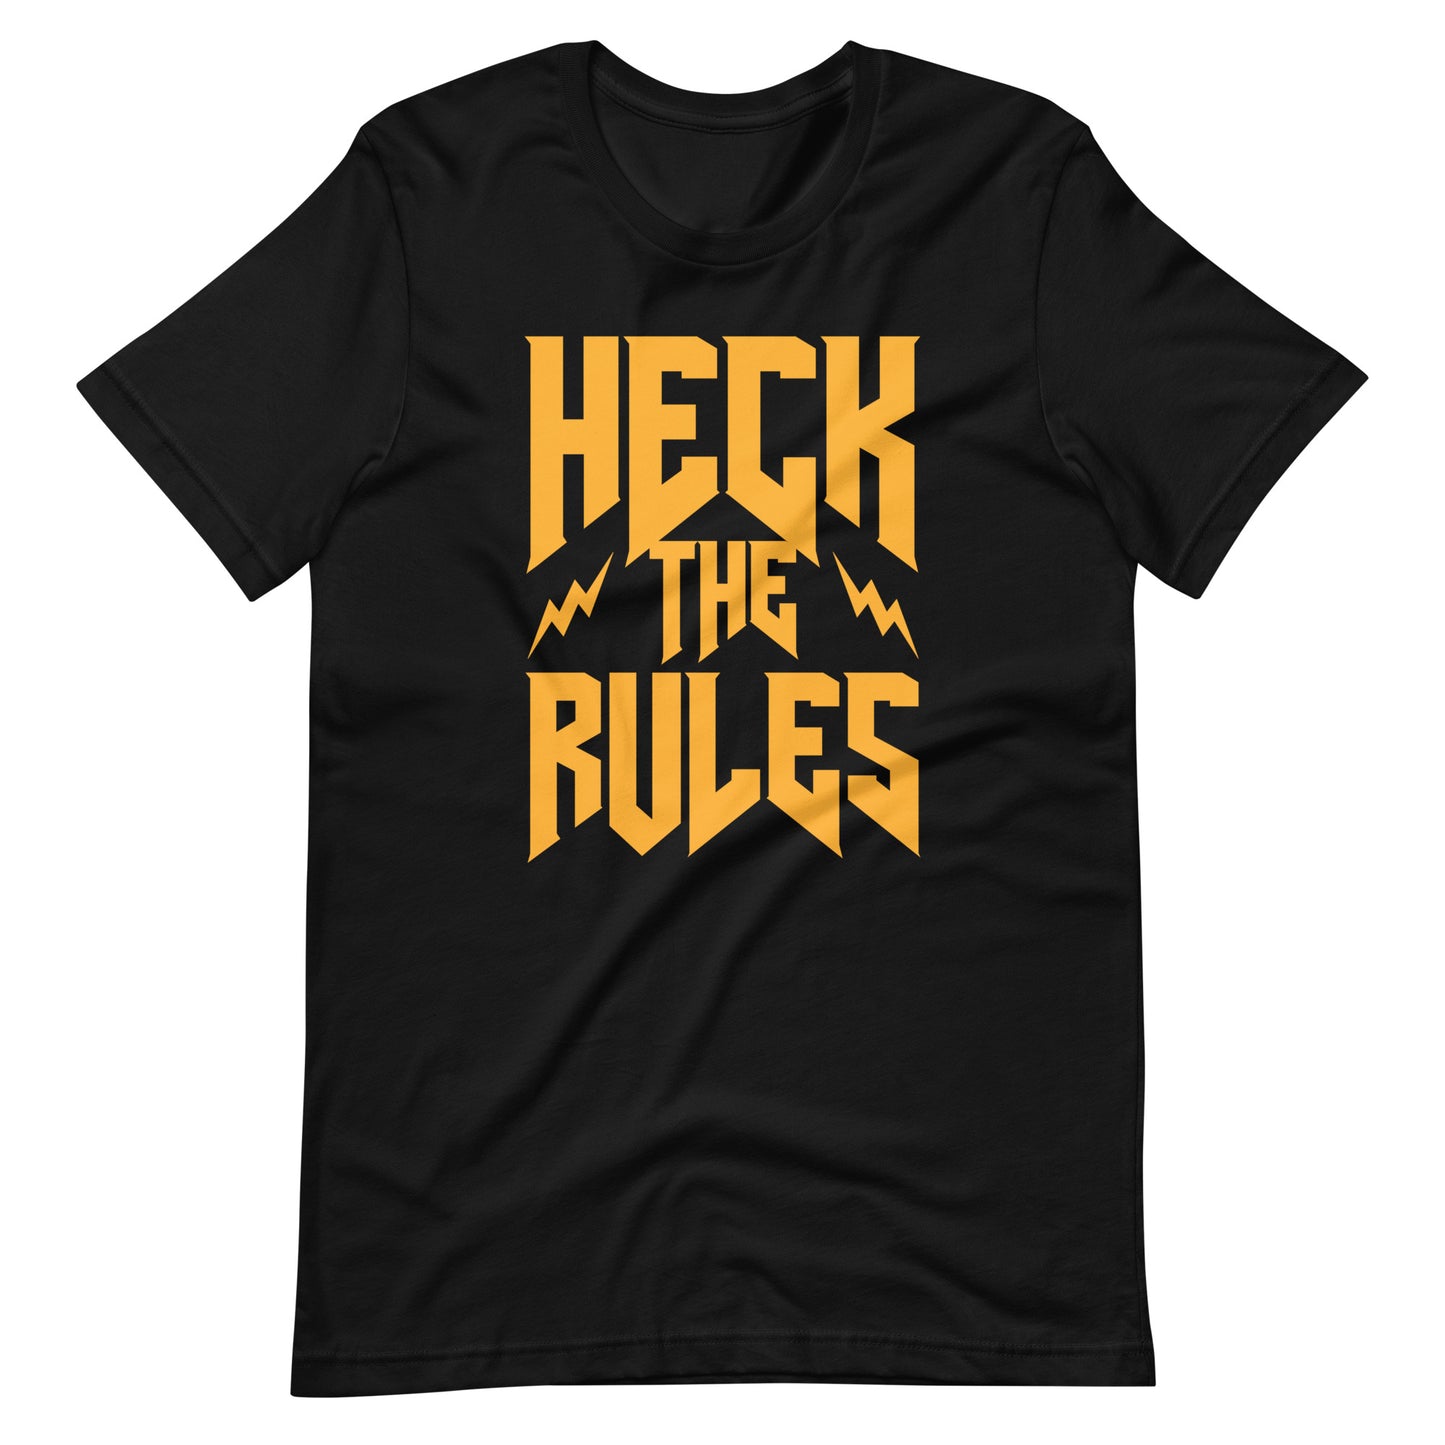 Wulf Clothing “Heck the Rules” Tee